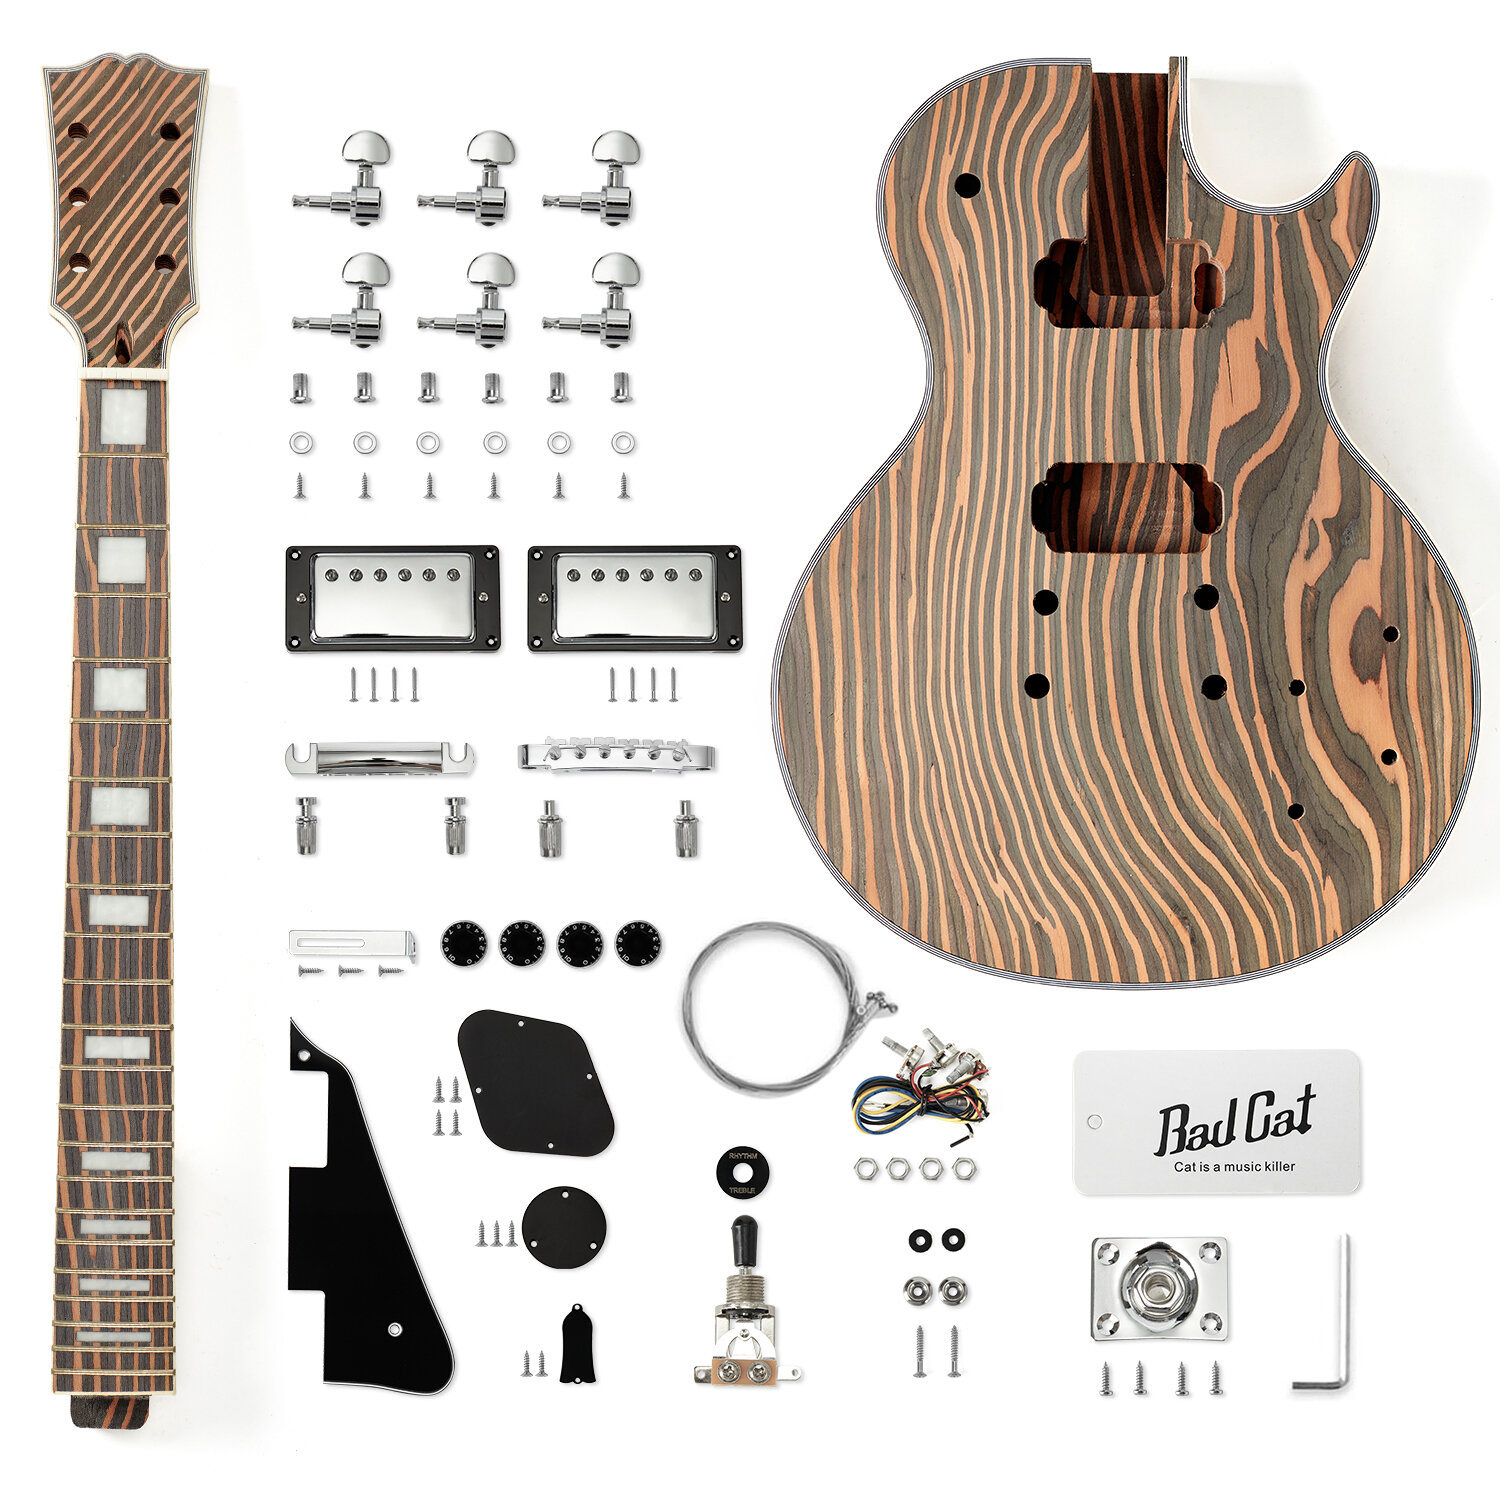 New 6 String Guitar Kit Zebrawood Solid Body LP Style Electric Guitar  Builder Kit Chrome Hardwares — BAD CAT INSTRUMENTS